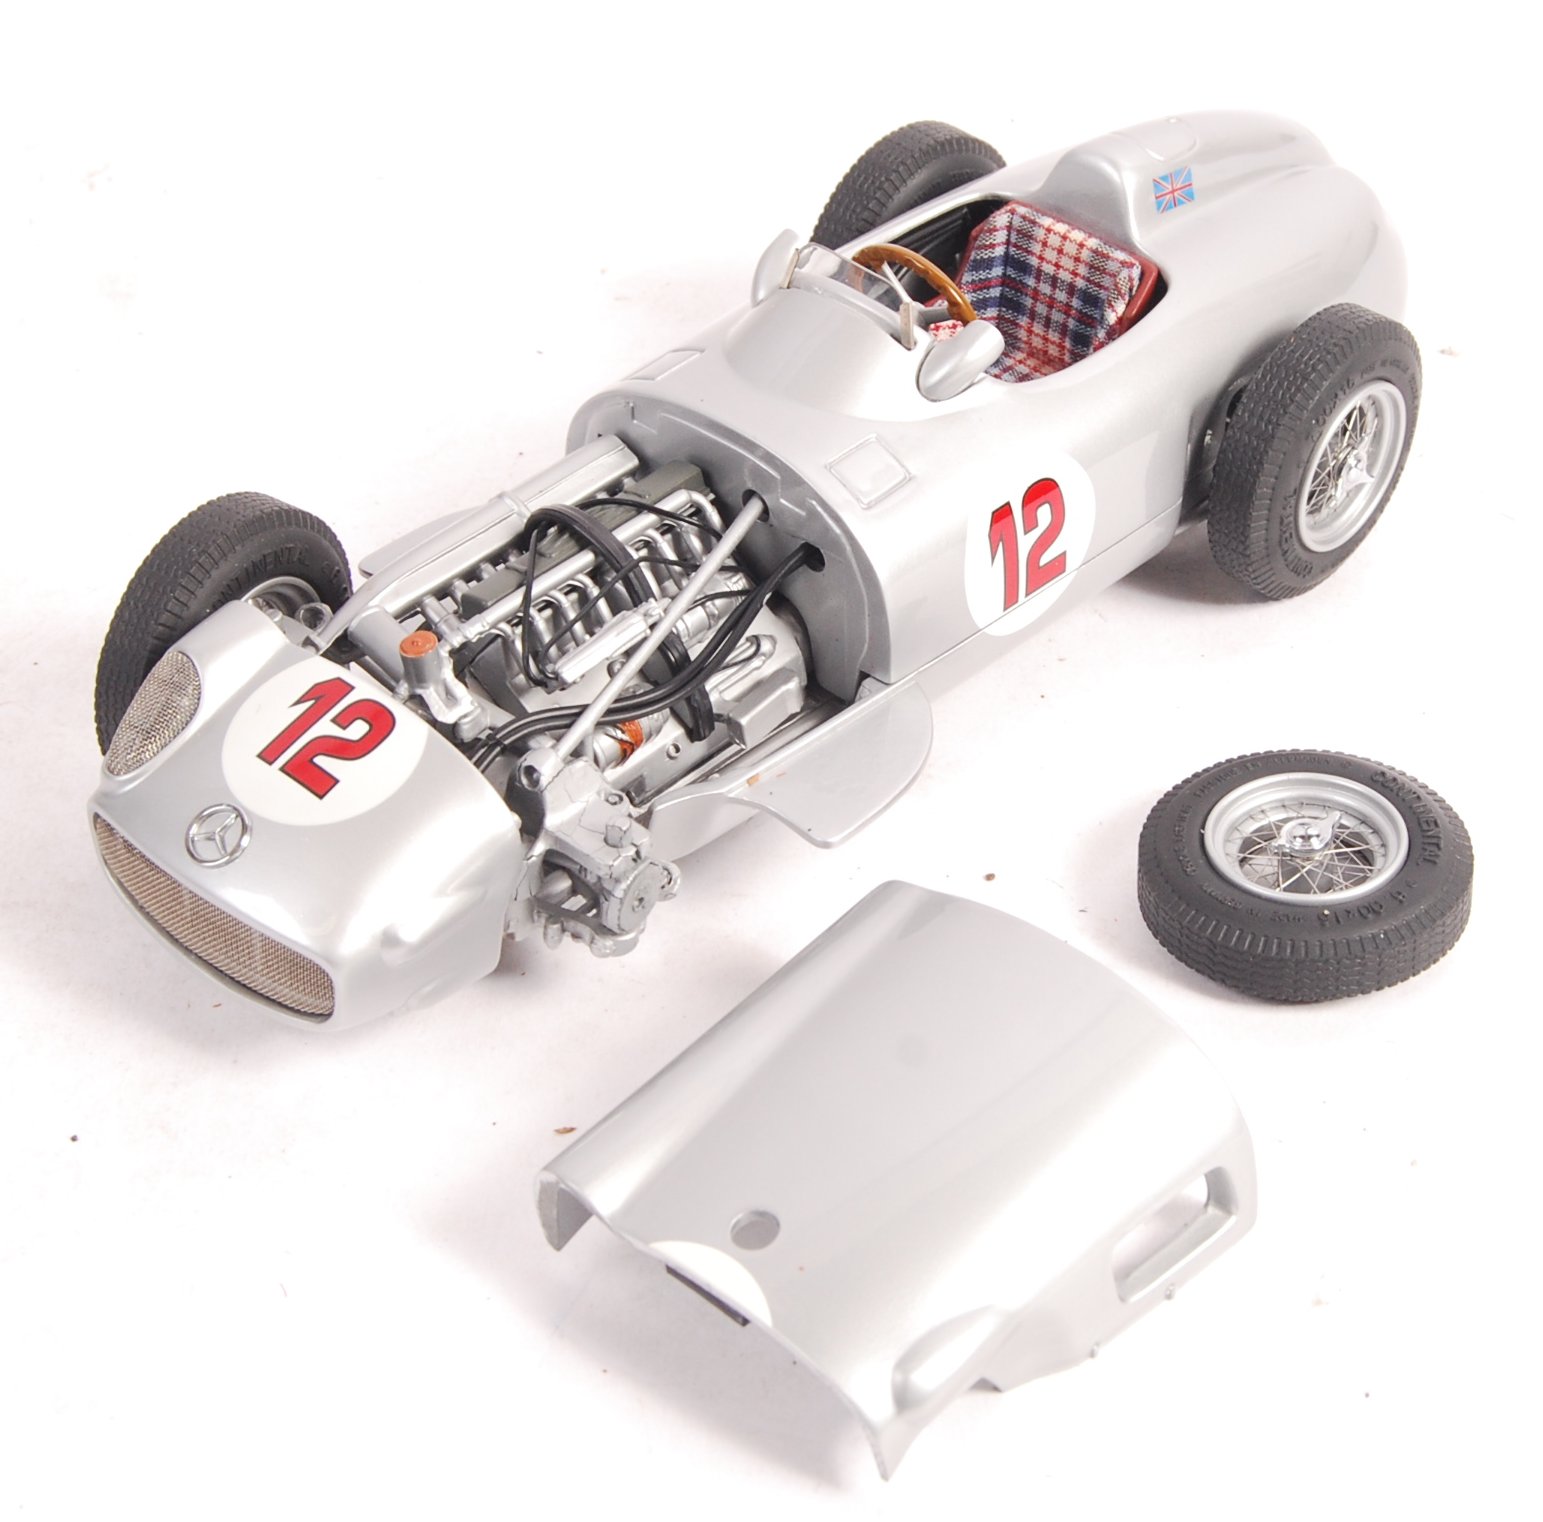 CMC 1/18 SCALE MERCEDES BENZ W196 #12 RACING CAR - Image 3 of 6